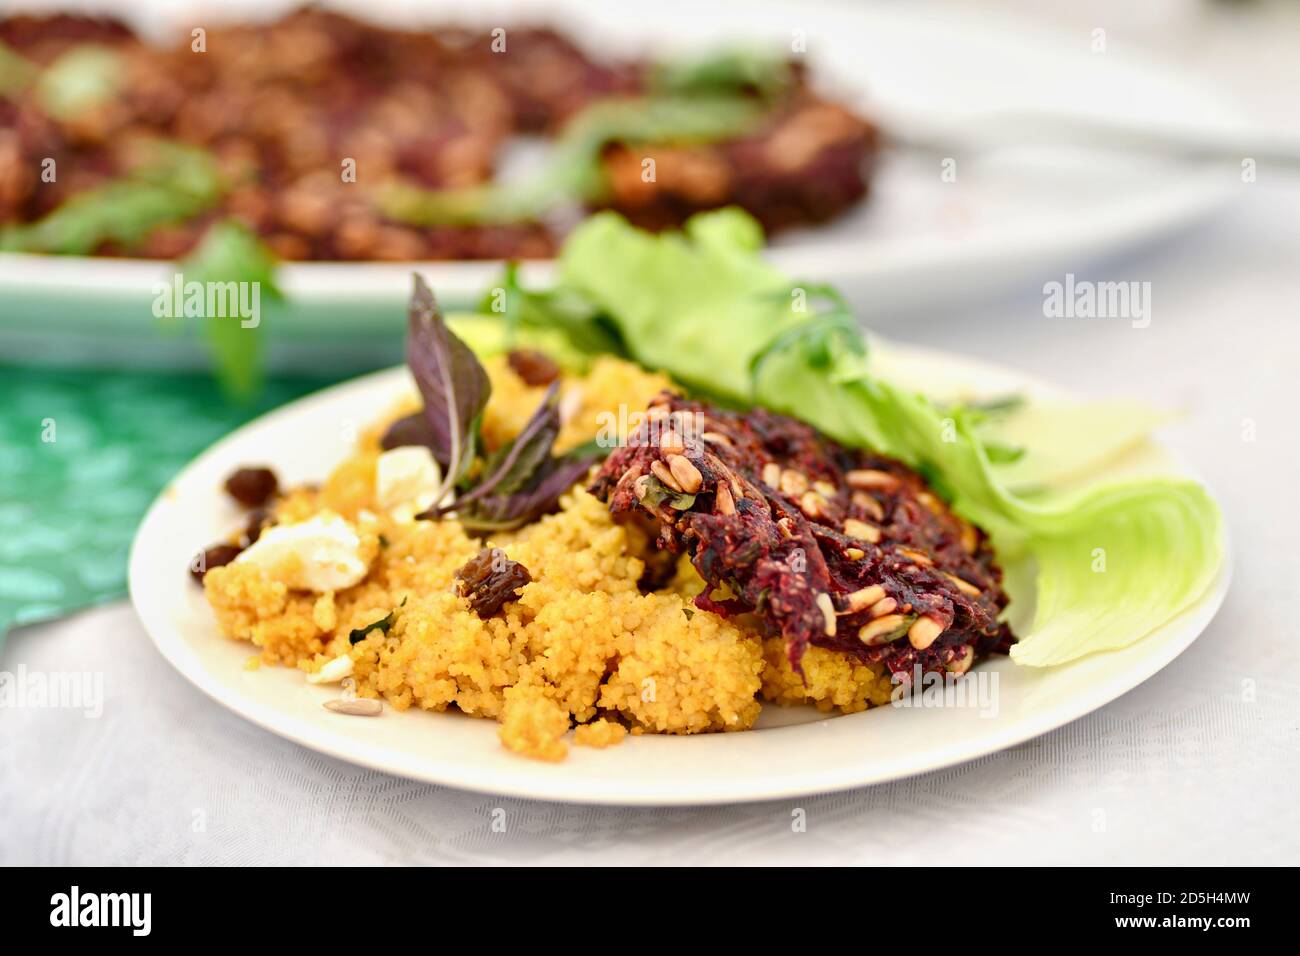 South American food, vegetable, meat, pancake with rice and crispy salad. Stock Photo